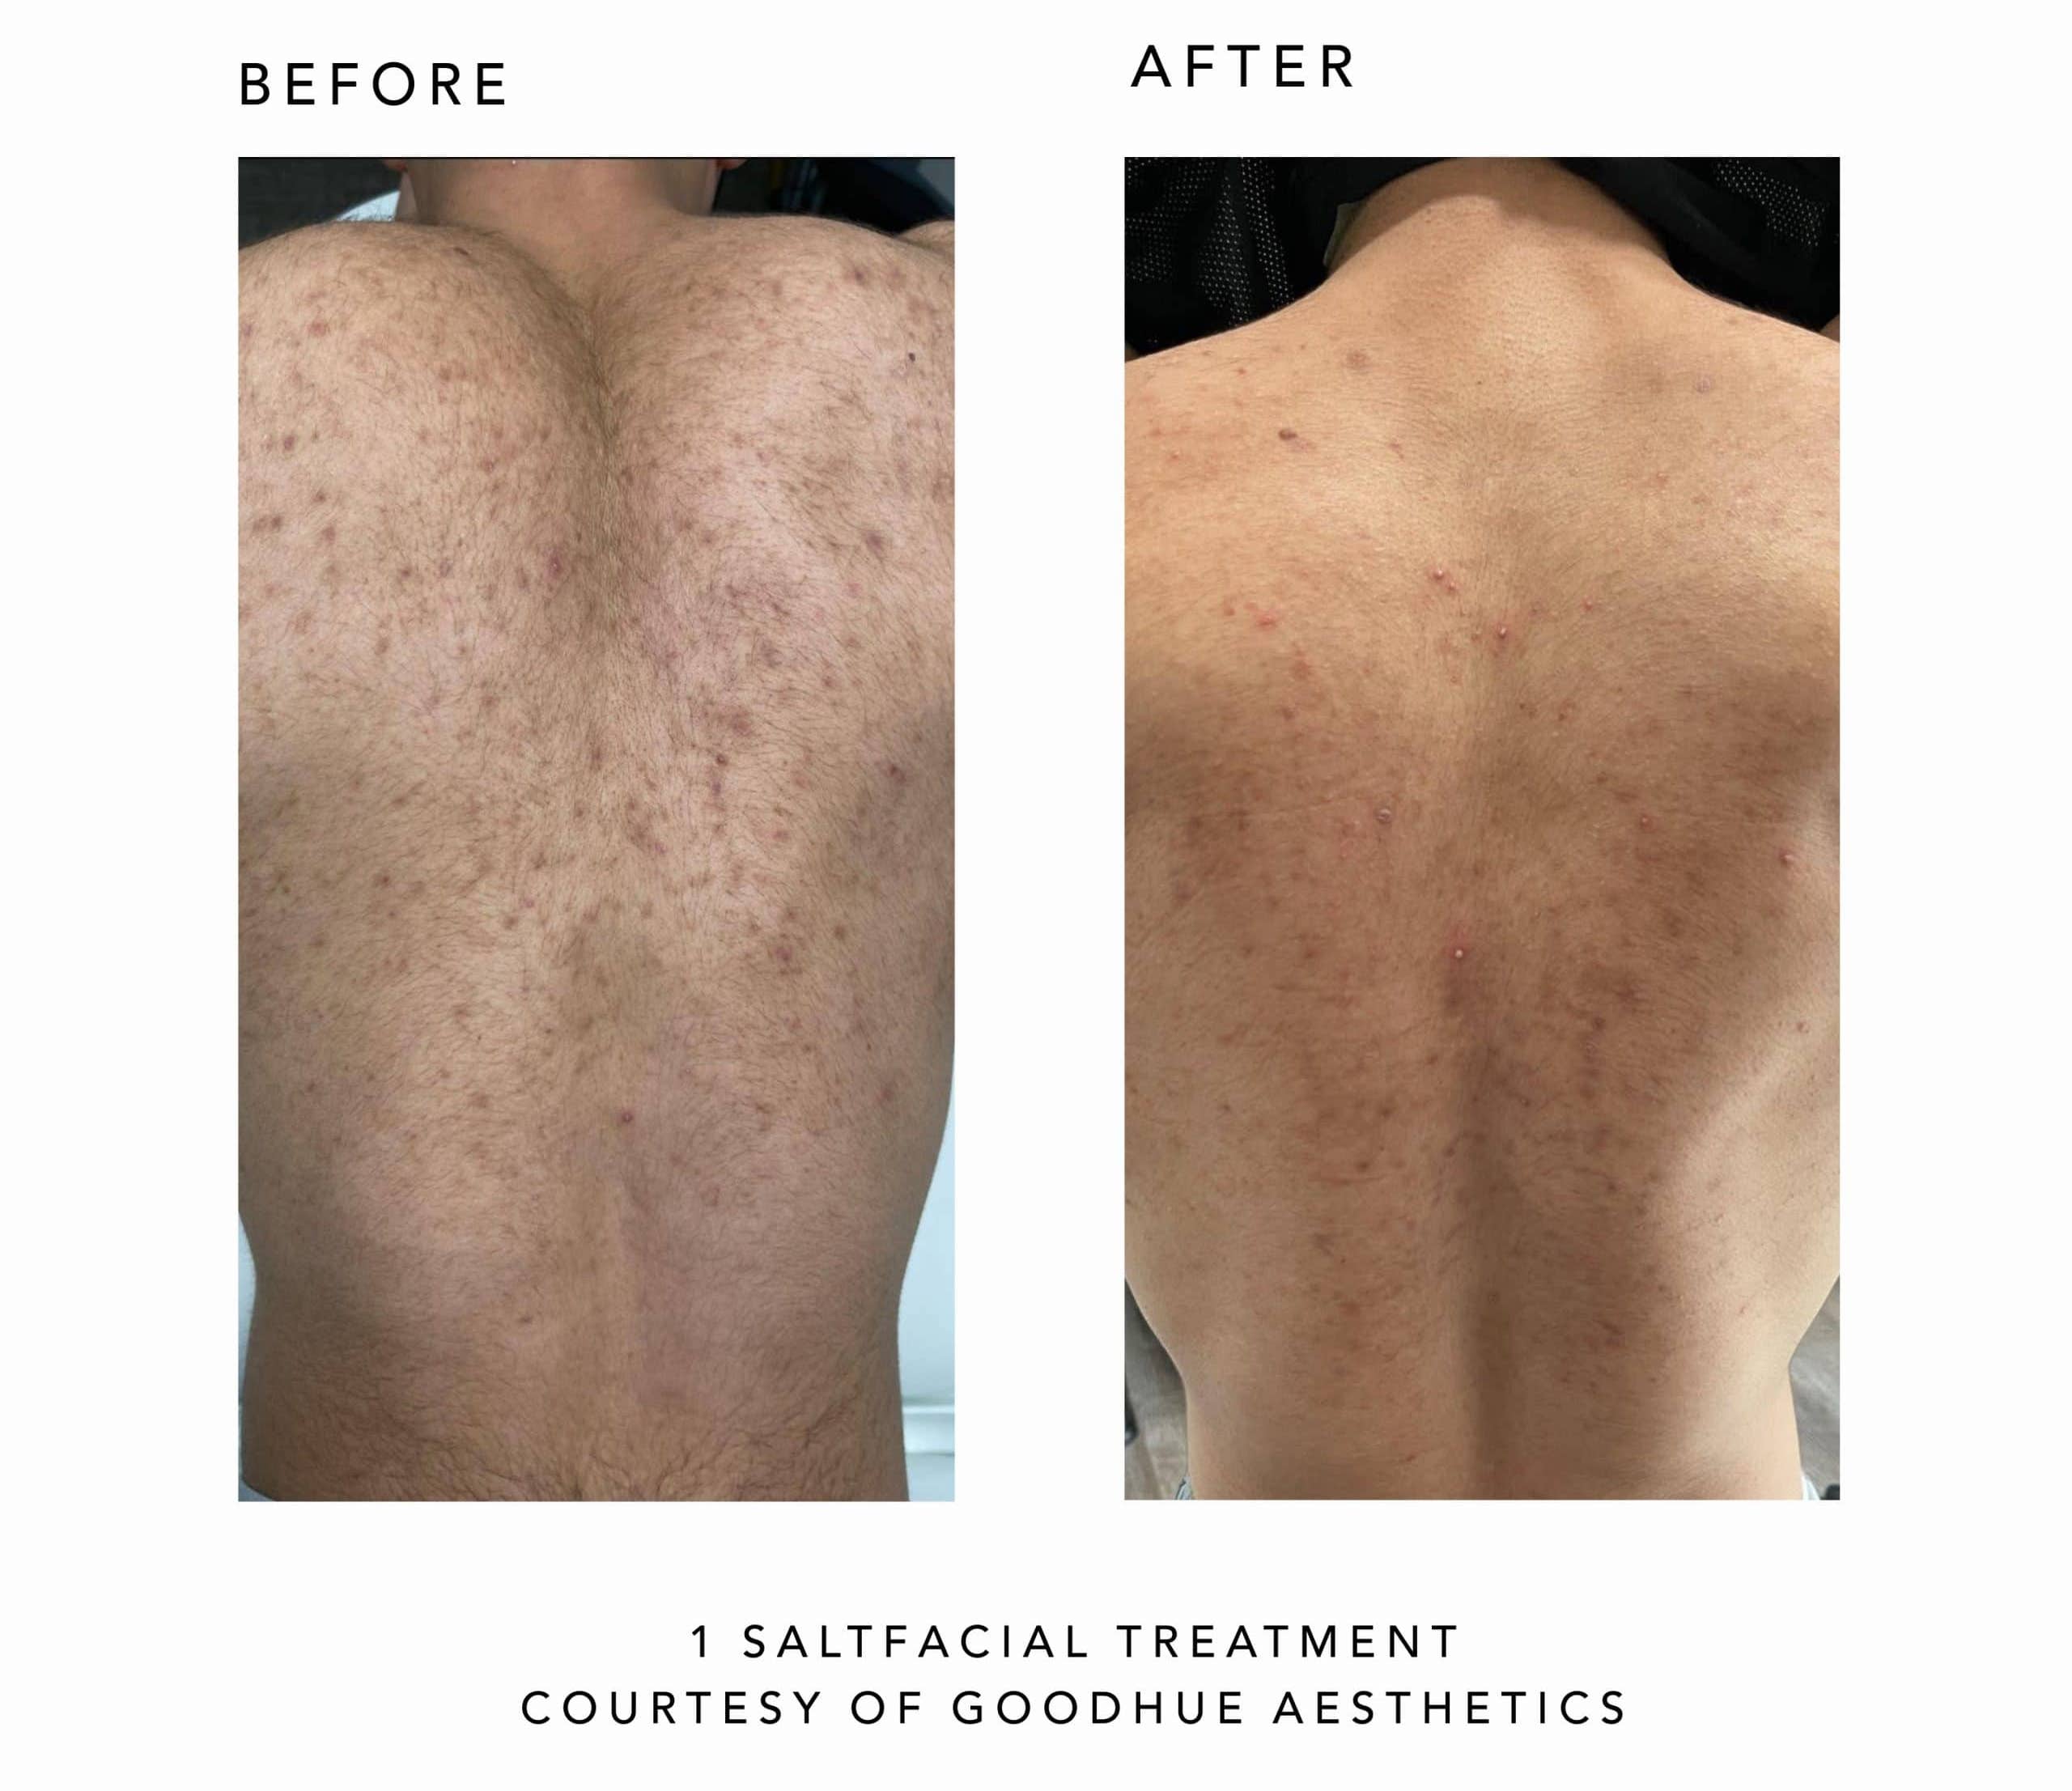 Quick Skin Revival with Saltfacial at Body Goal Medspa